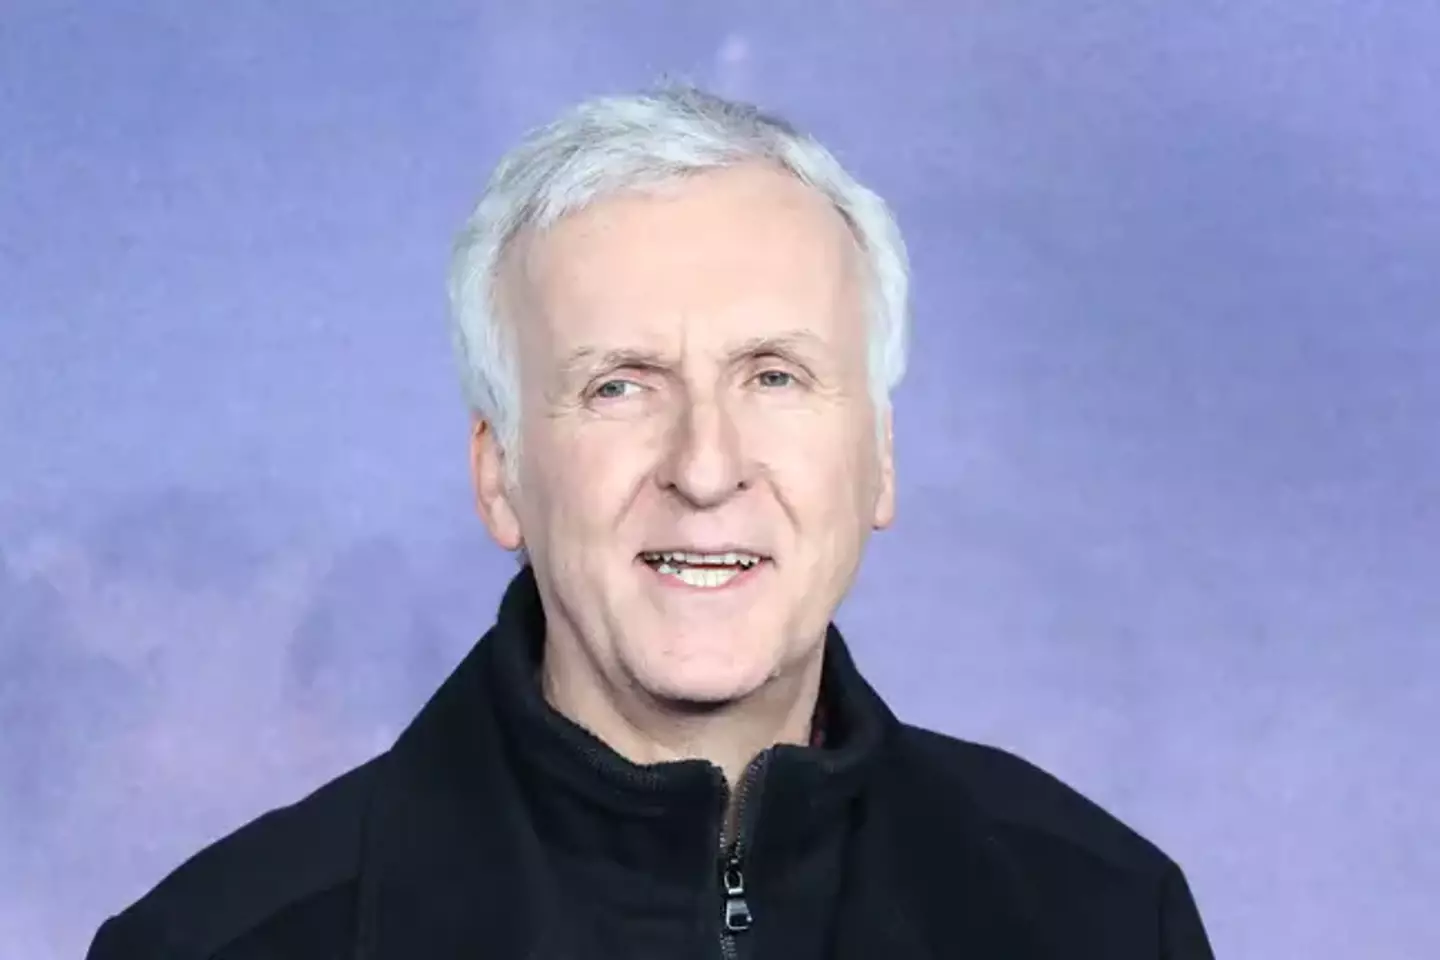 James Cameron is well aware the movie needs to make a lot of money.